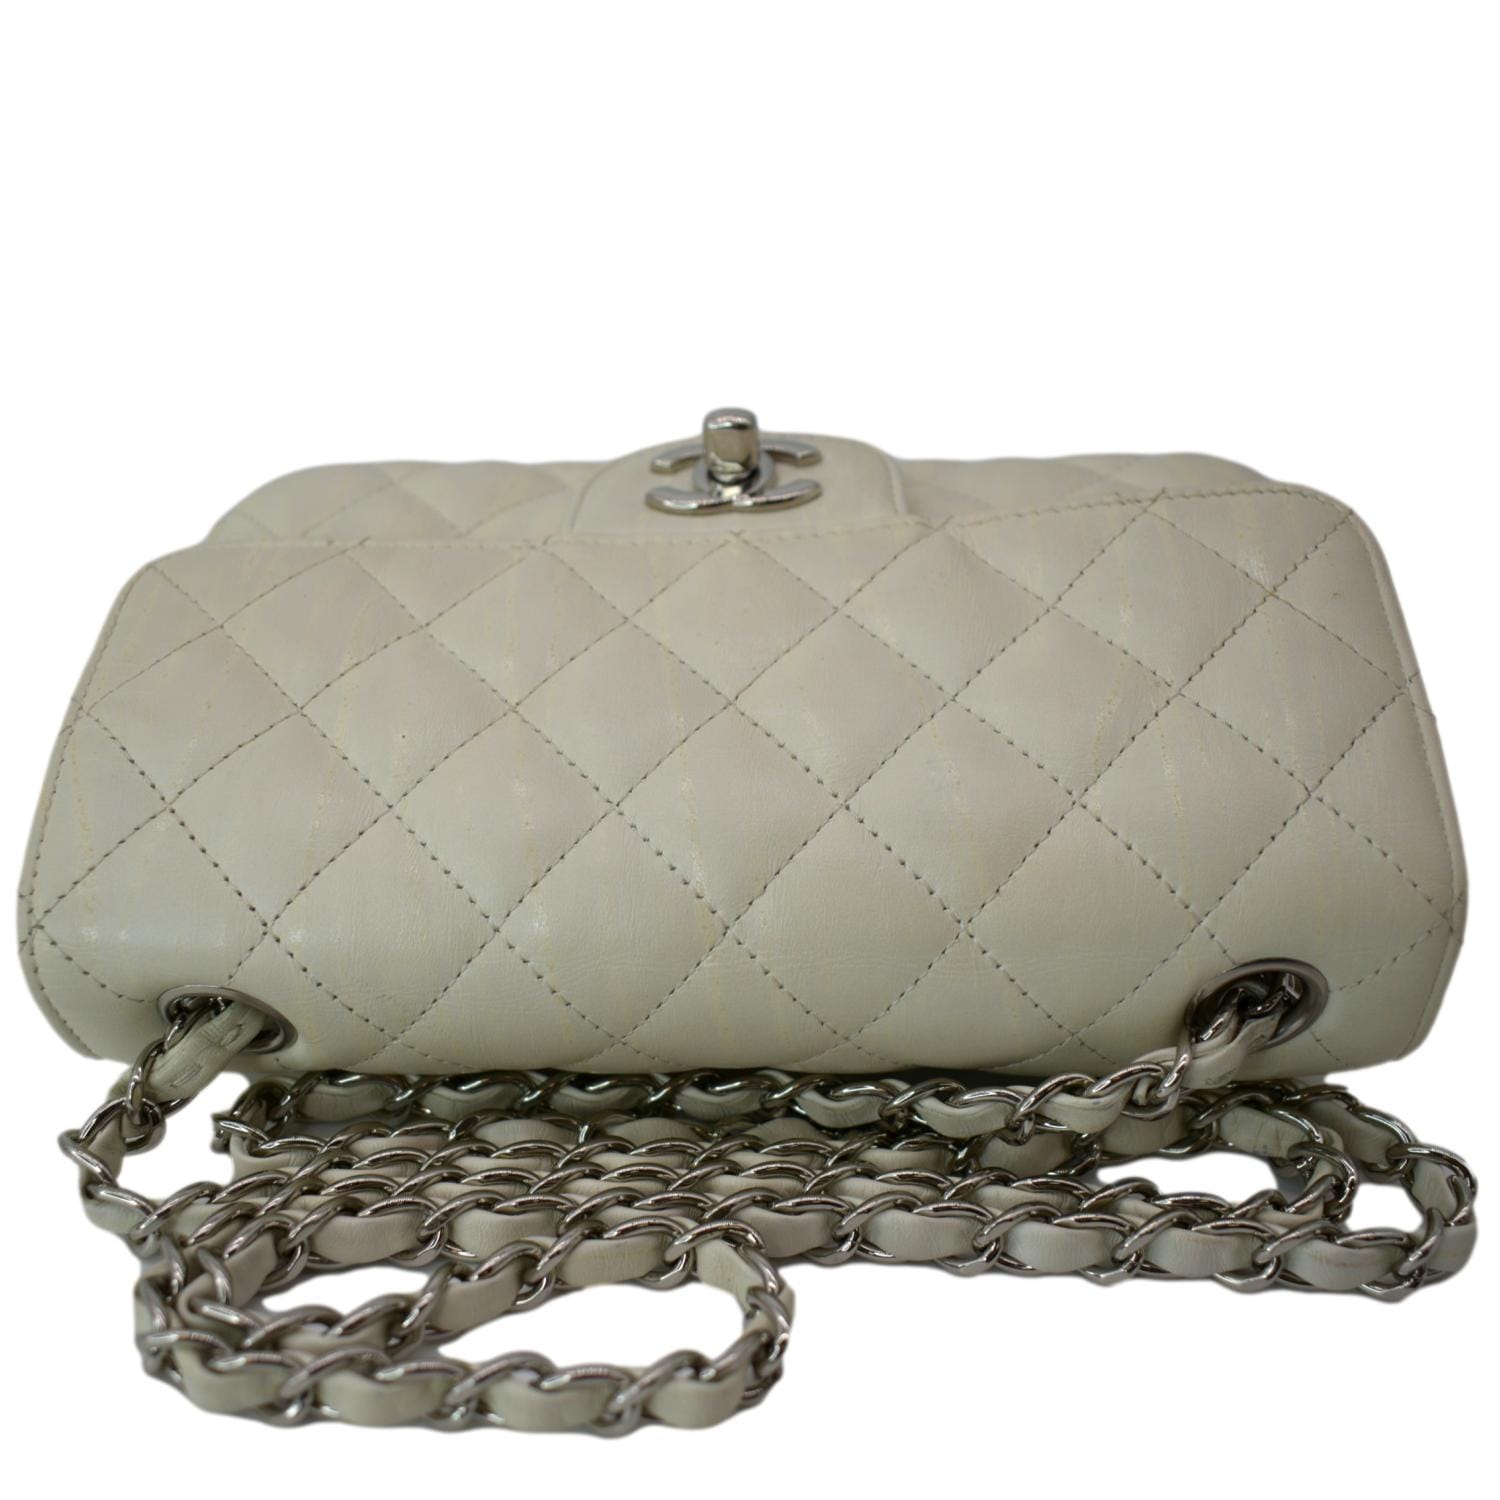 Chanel - Classic Small Flap Wallet in Grained Calfskin with Silver Hardware